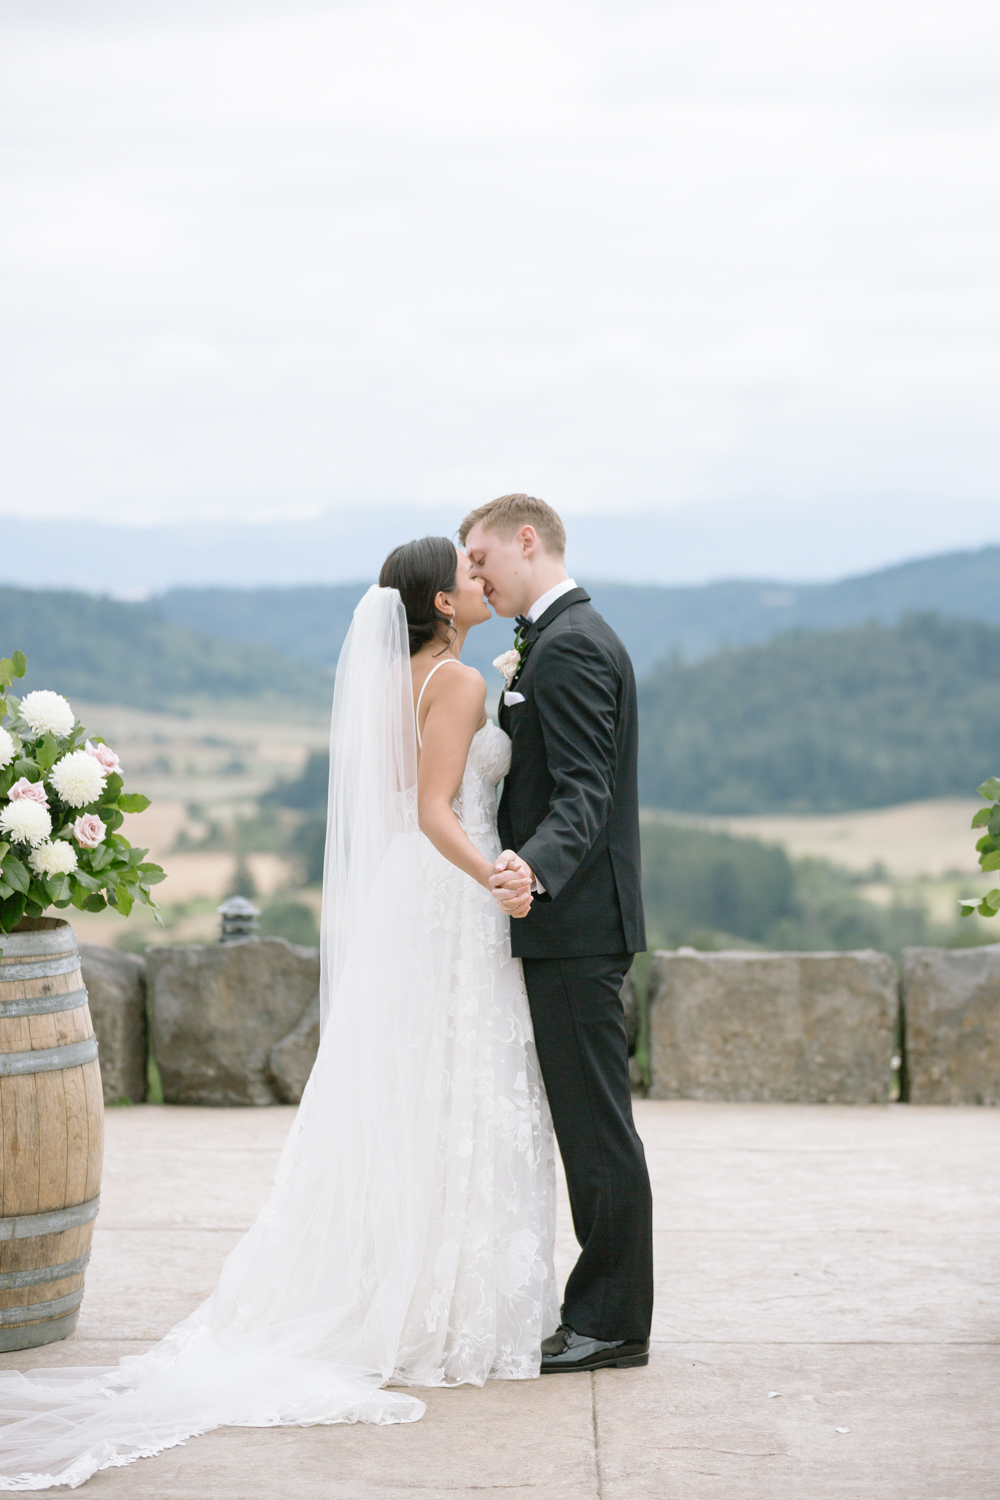 Youngberg Hill Vineyard Wedding in Wine Country Oregon - Corrie Mick Photography-325.jpg